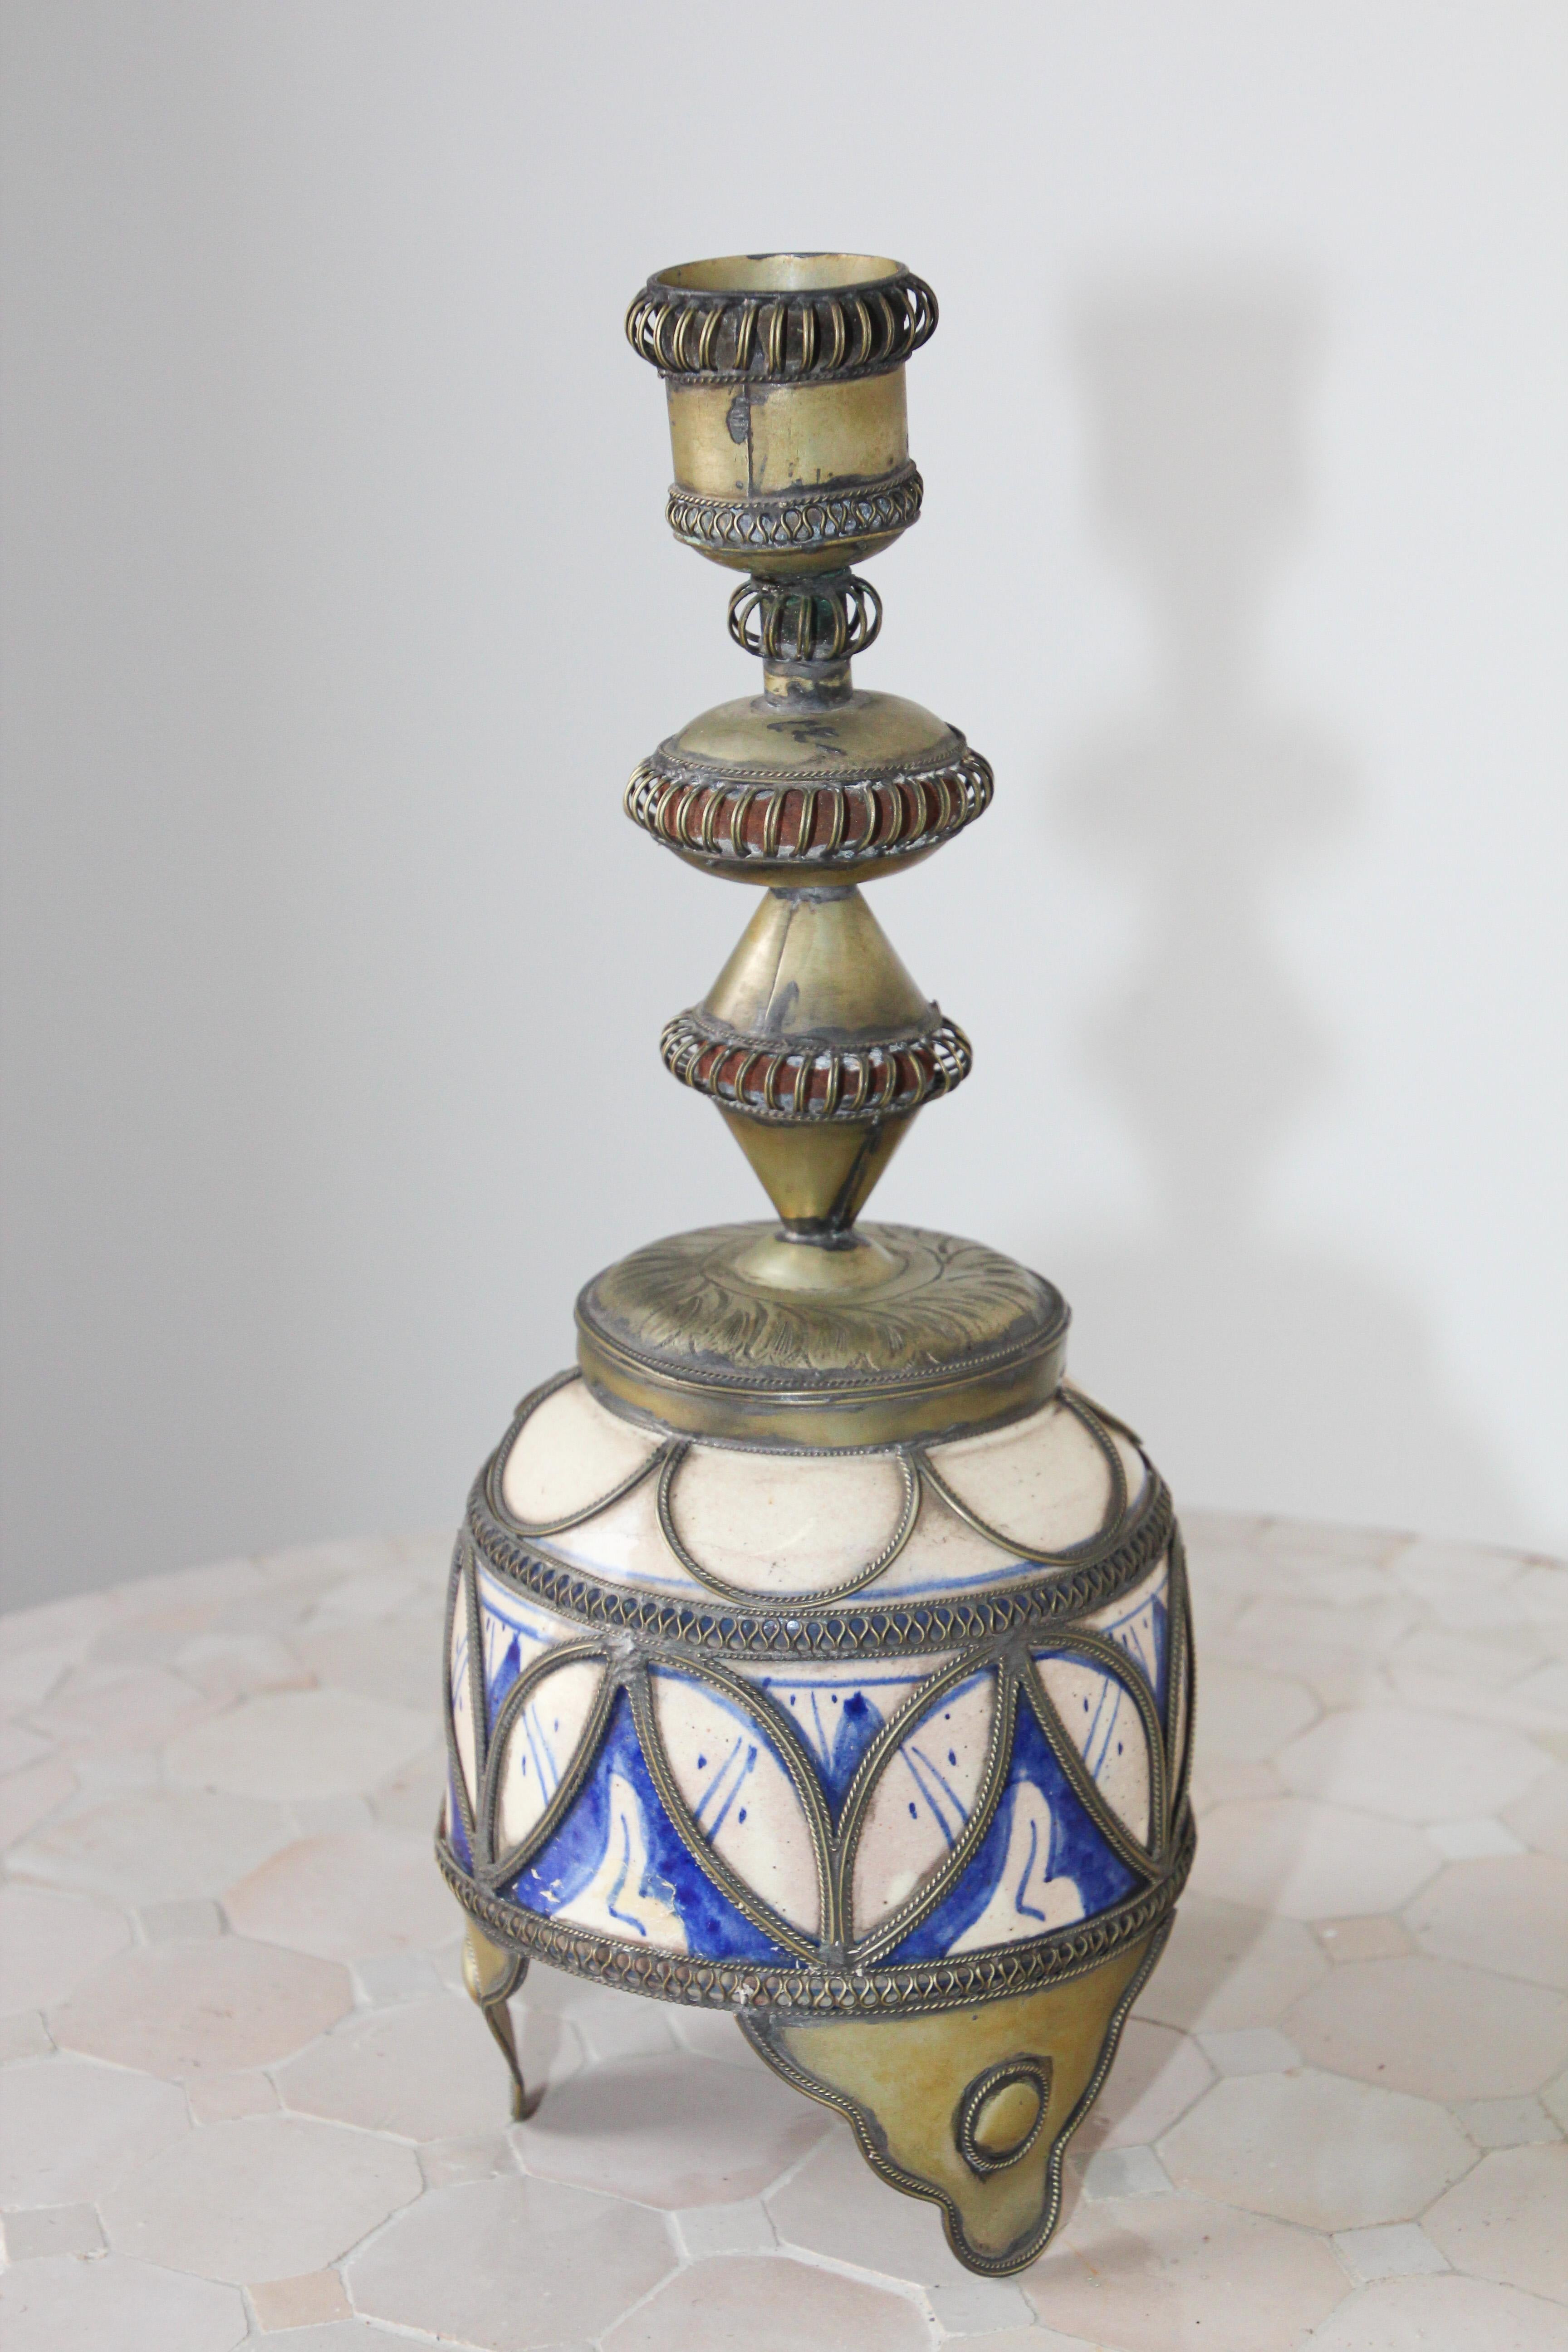 Hand-Crafted Moorish Moroccan Ceramic Candlestick from Fez with Silver Filigree